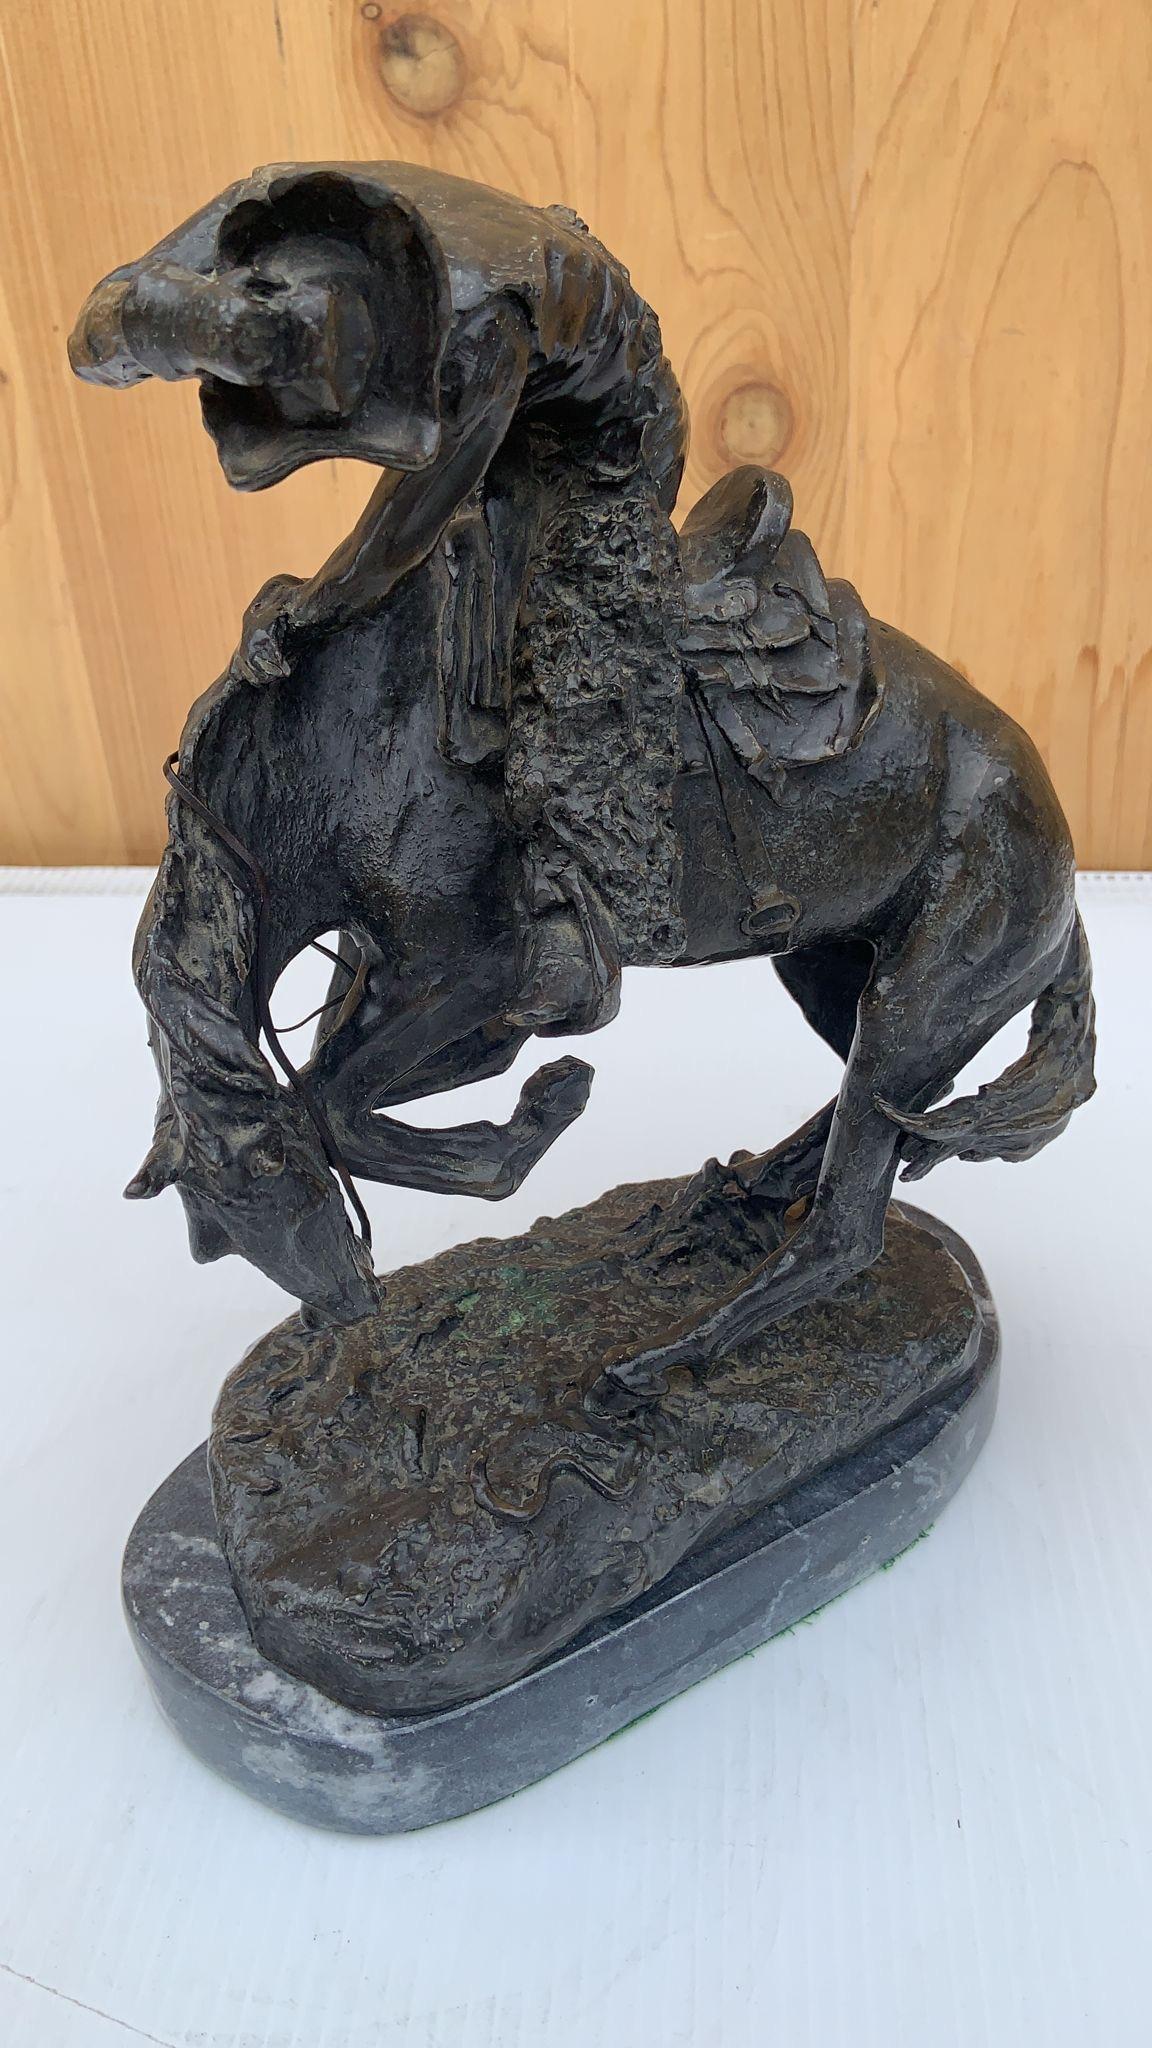 Vintage Rattlesnake by Frederic Remington Sculpture Statue 

Beautiful Cowboy/Southwestern style sculpture. 

Lost wax bronze casting process. 

Mounted on a fine marble base. 

The plank in the front is missing. 

Circa 1960

Dimensions